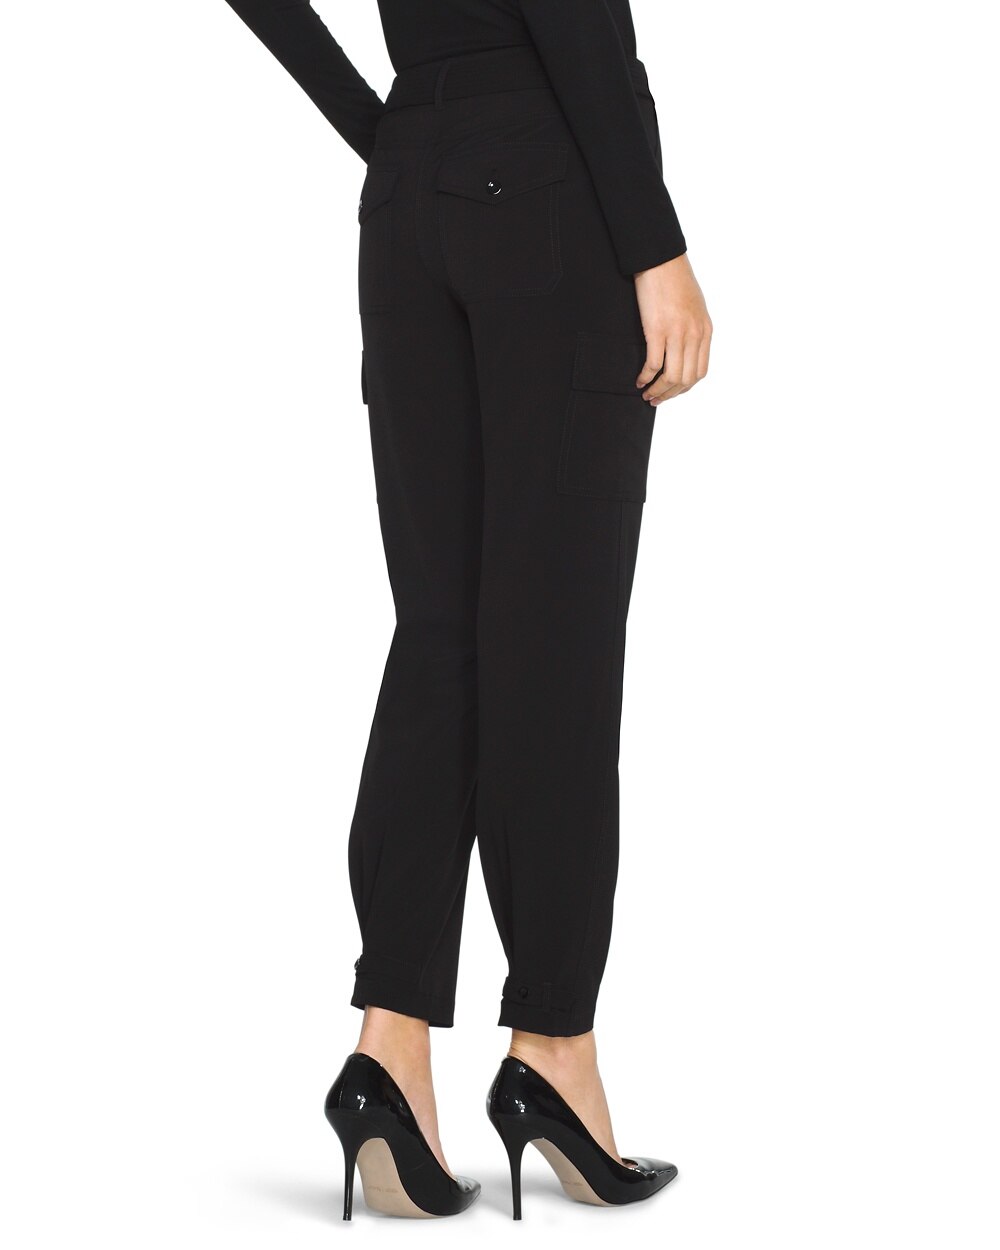 6R /8S You Choose WHBM White House Black Market Utility Tapered Ankle Pants 4R 